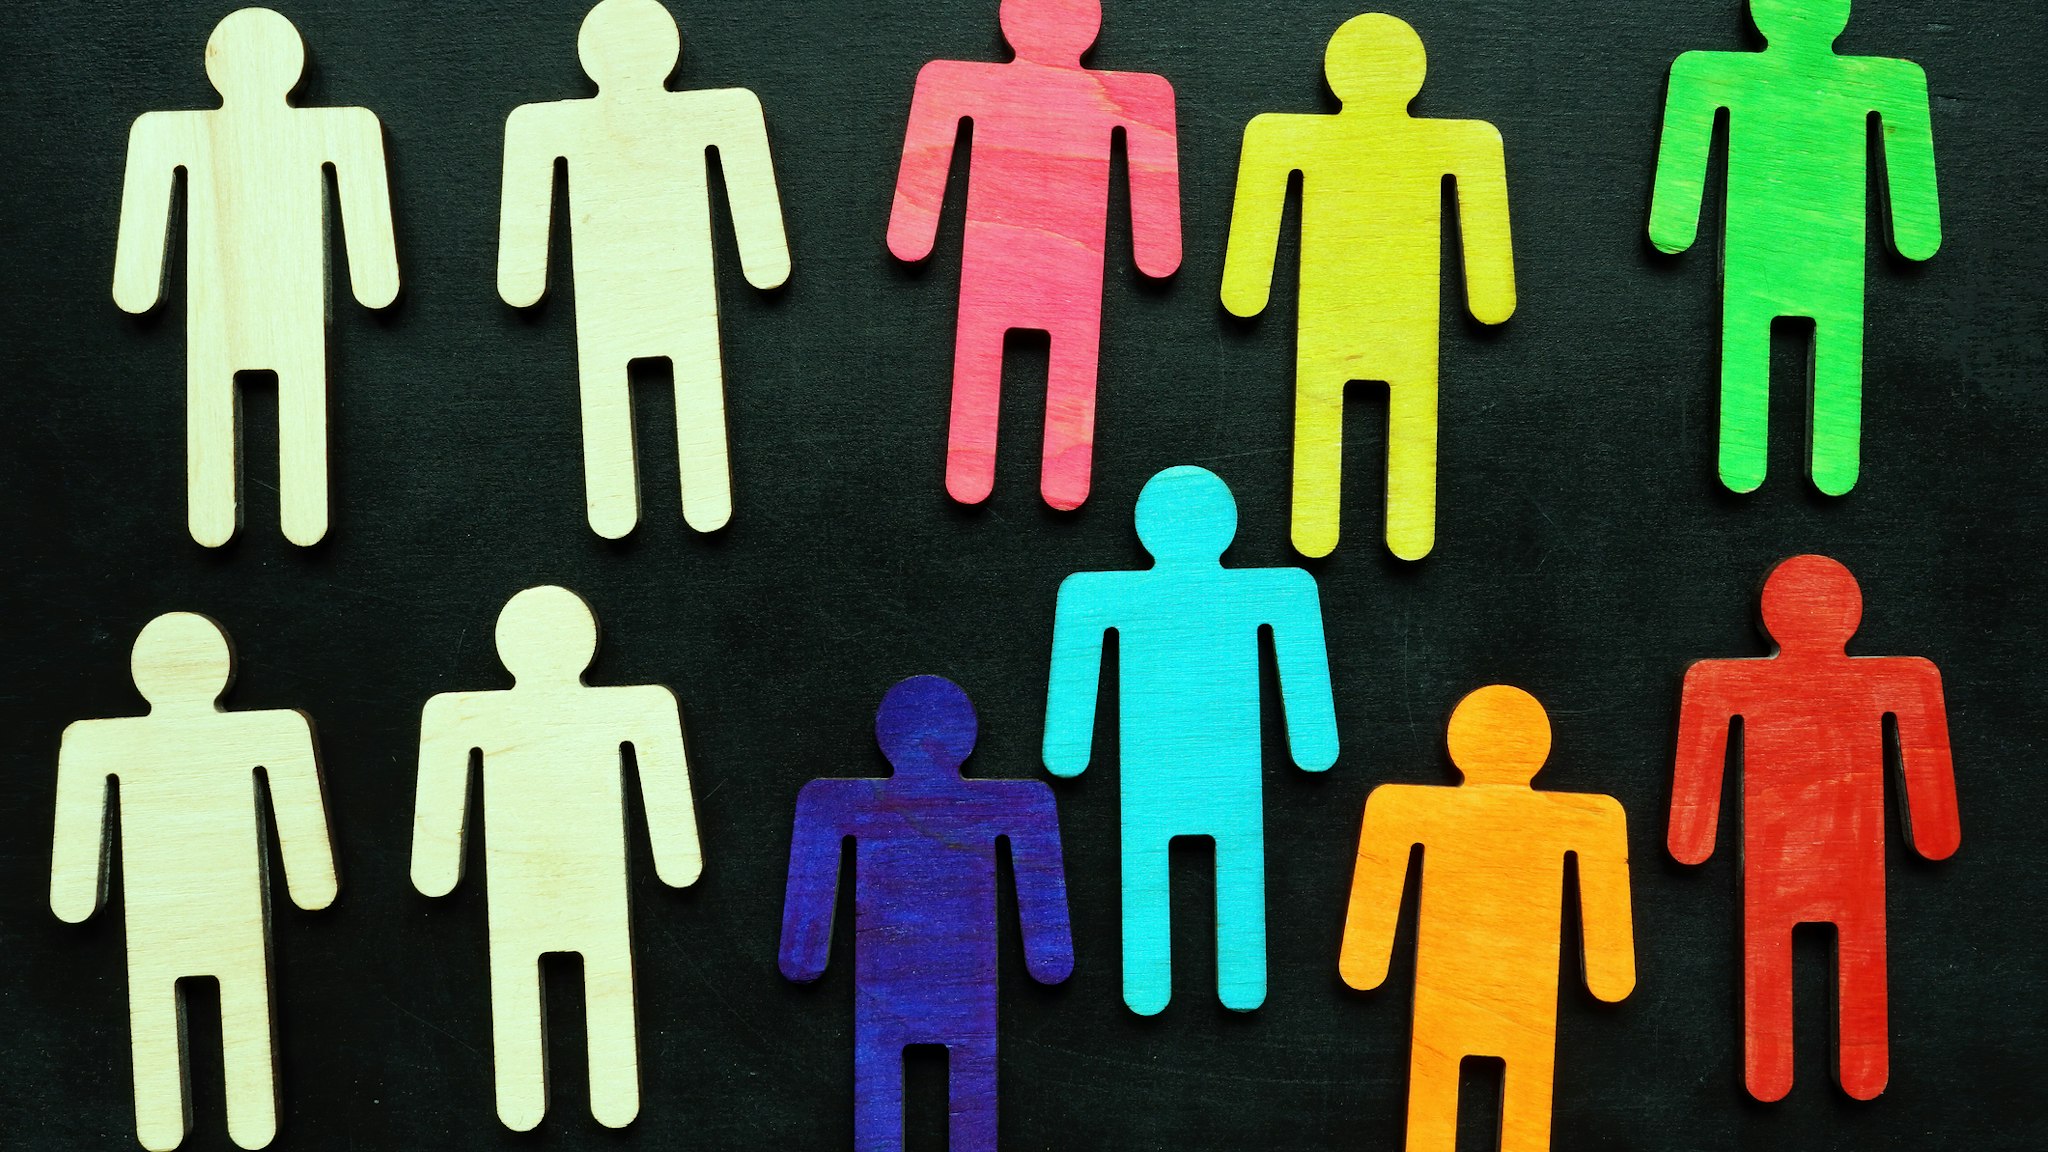 Equality and diversity concept. Multi-colored wooden figurines on a blackboard.